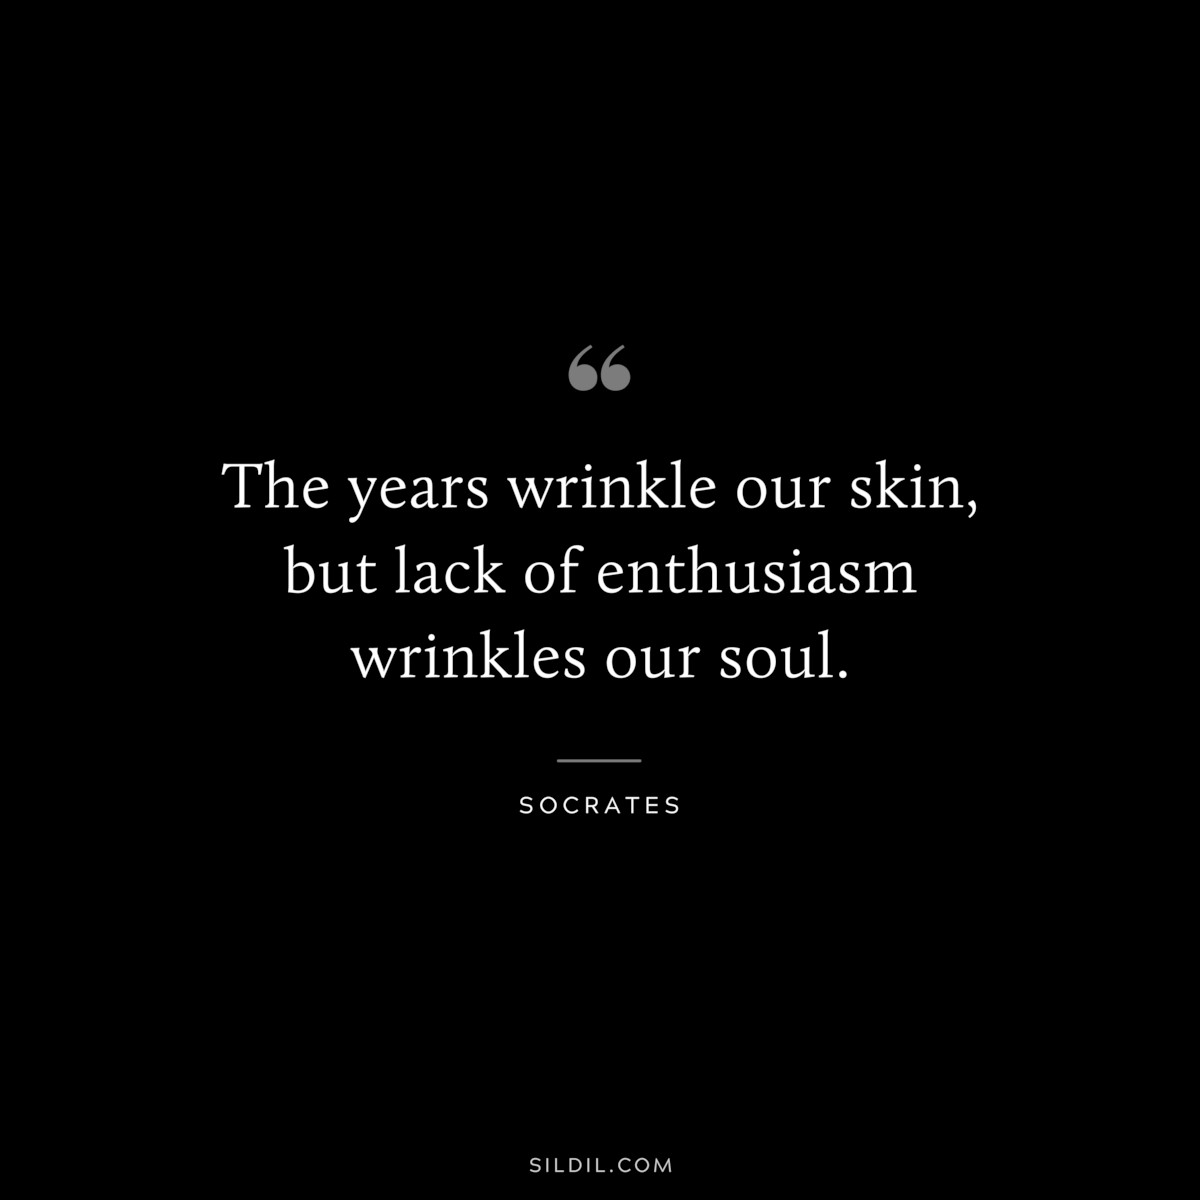 The years wrinkle our skin, but lack of enthusiasm wrinkles our soul. ― Socrates